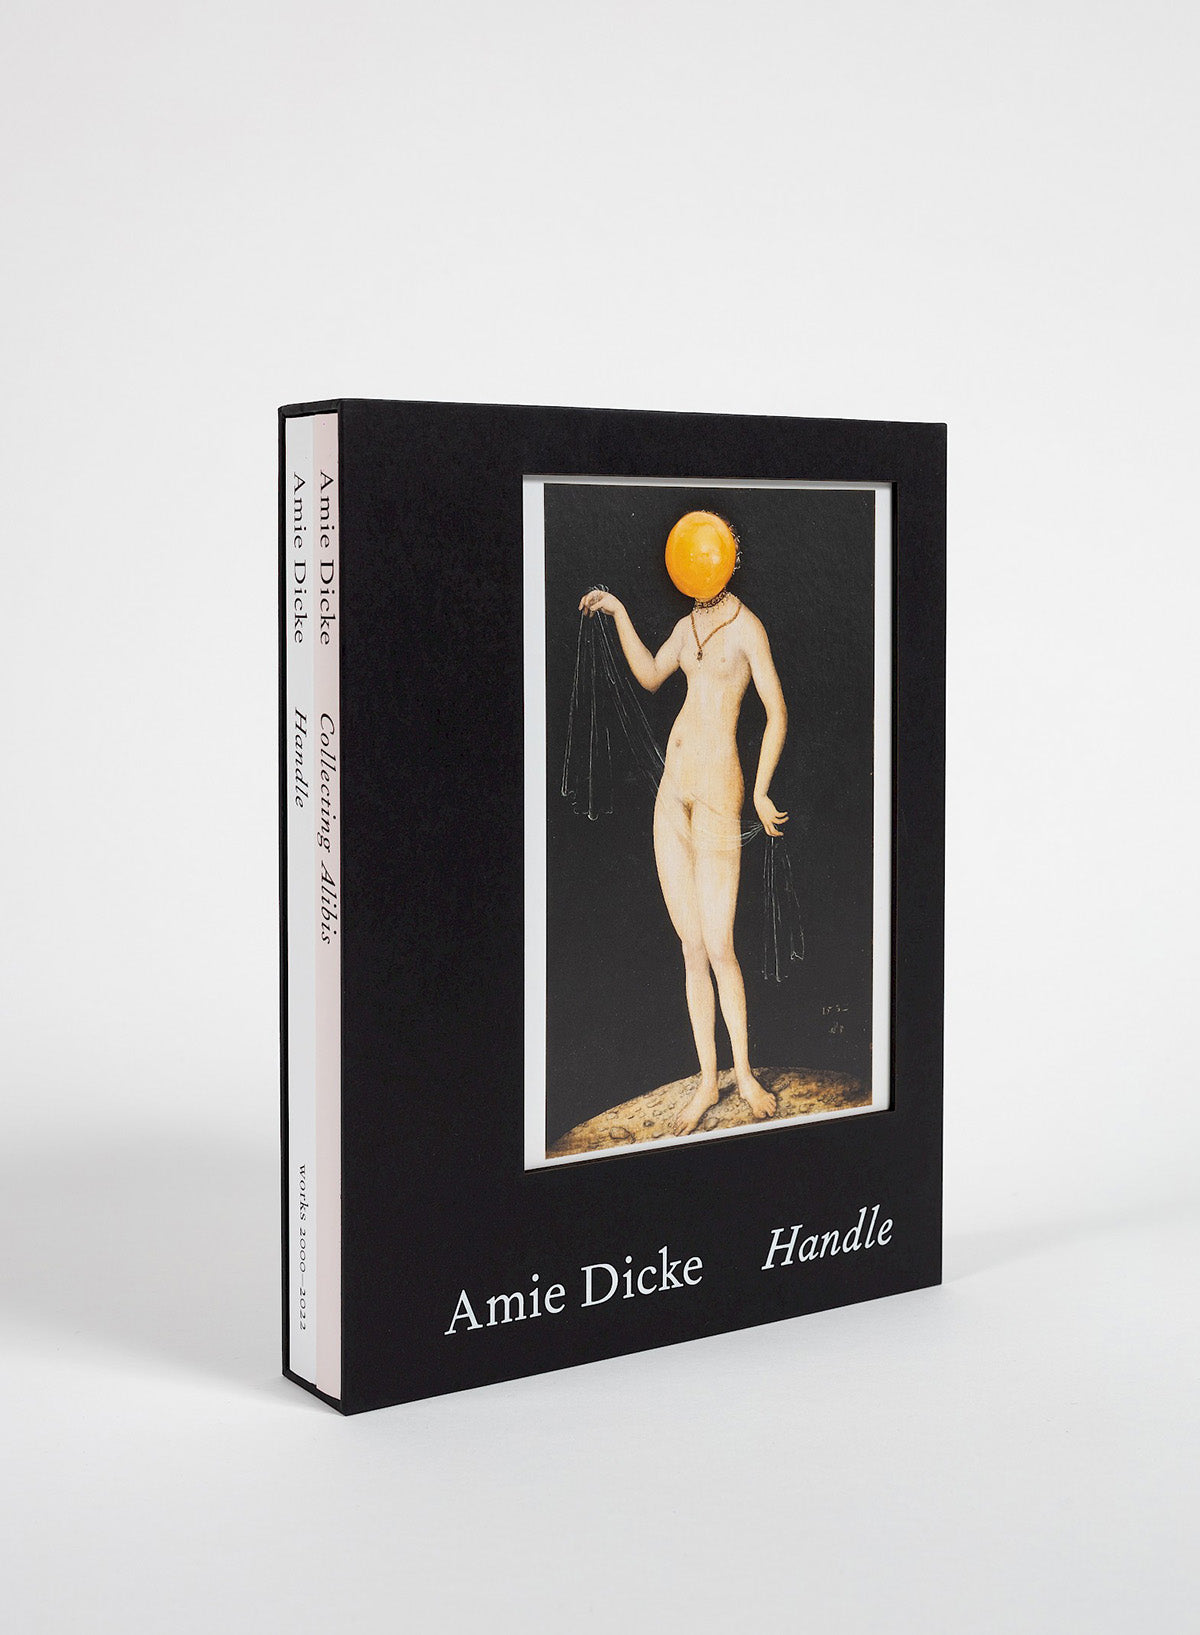 Collecting Alibis - Amie Dicke